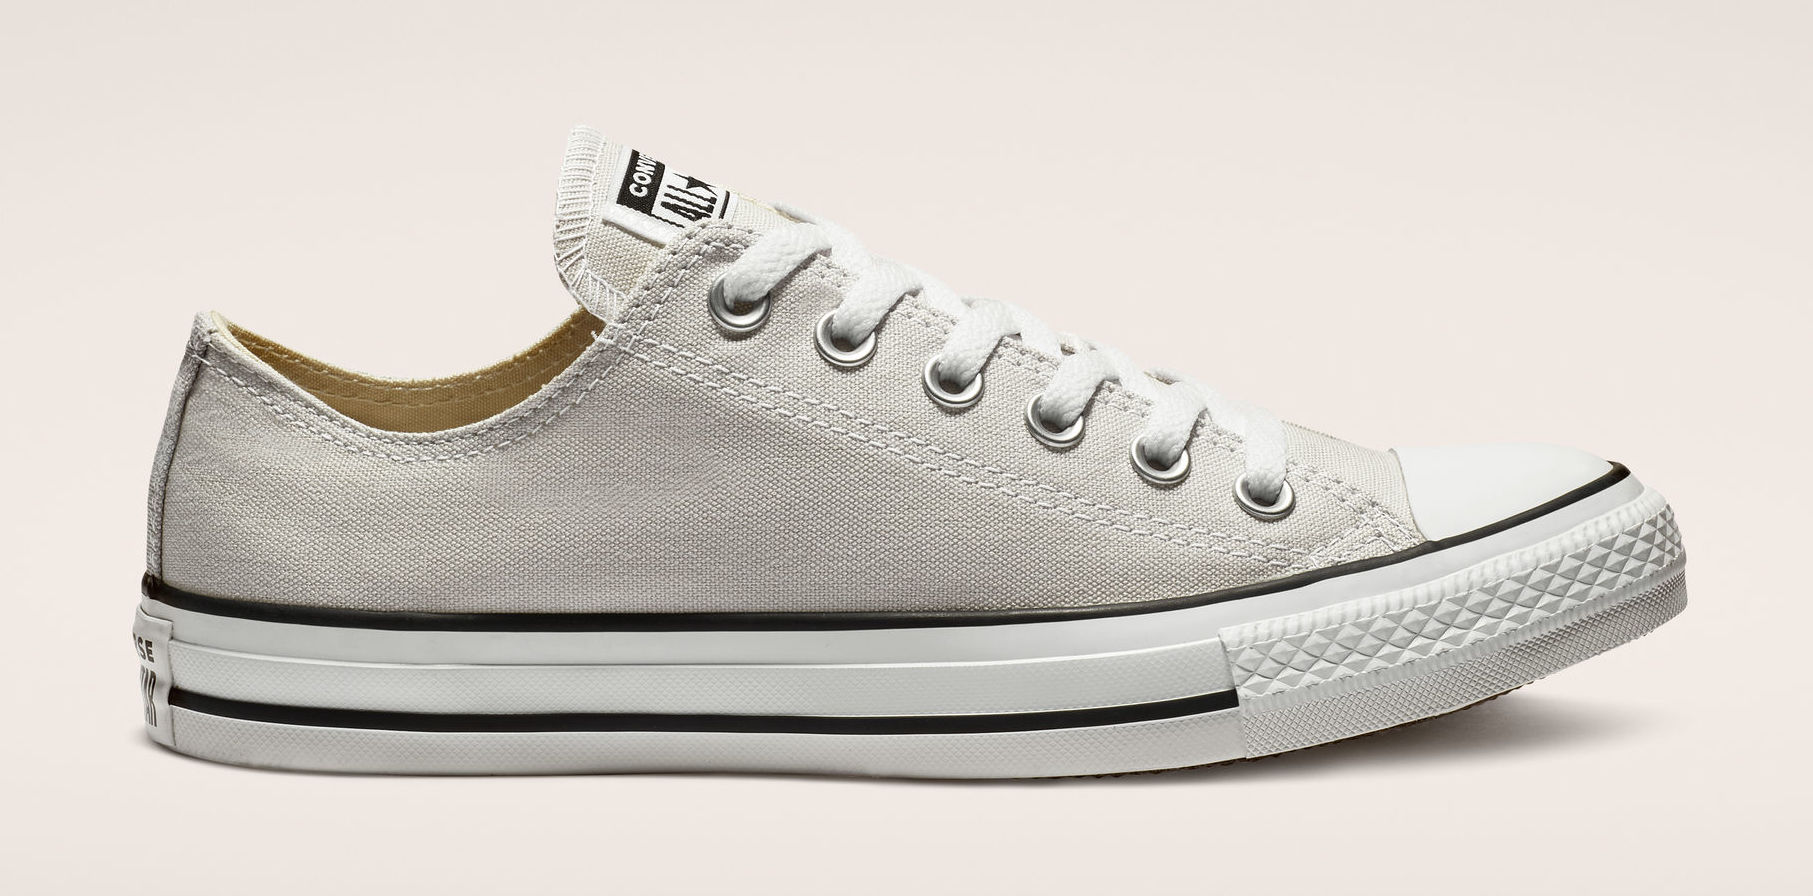 Converse Chuck Taylor All Star 161423F Lateral